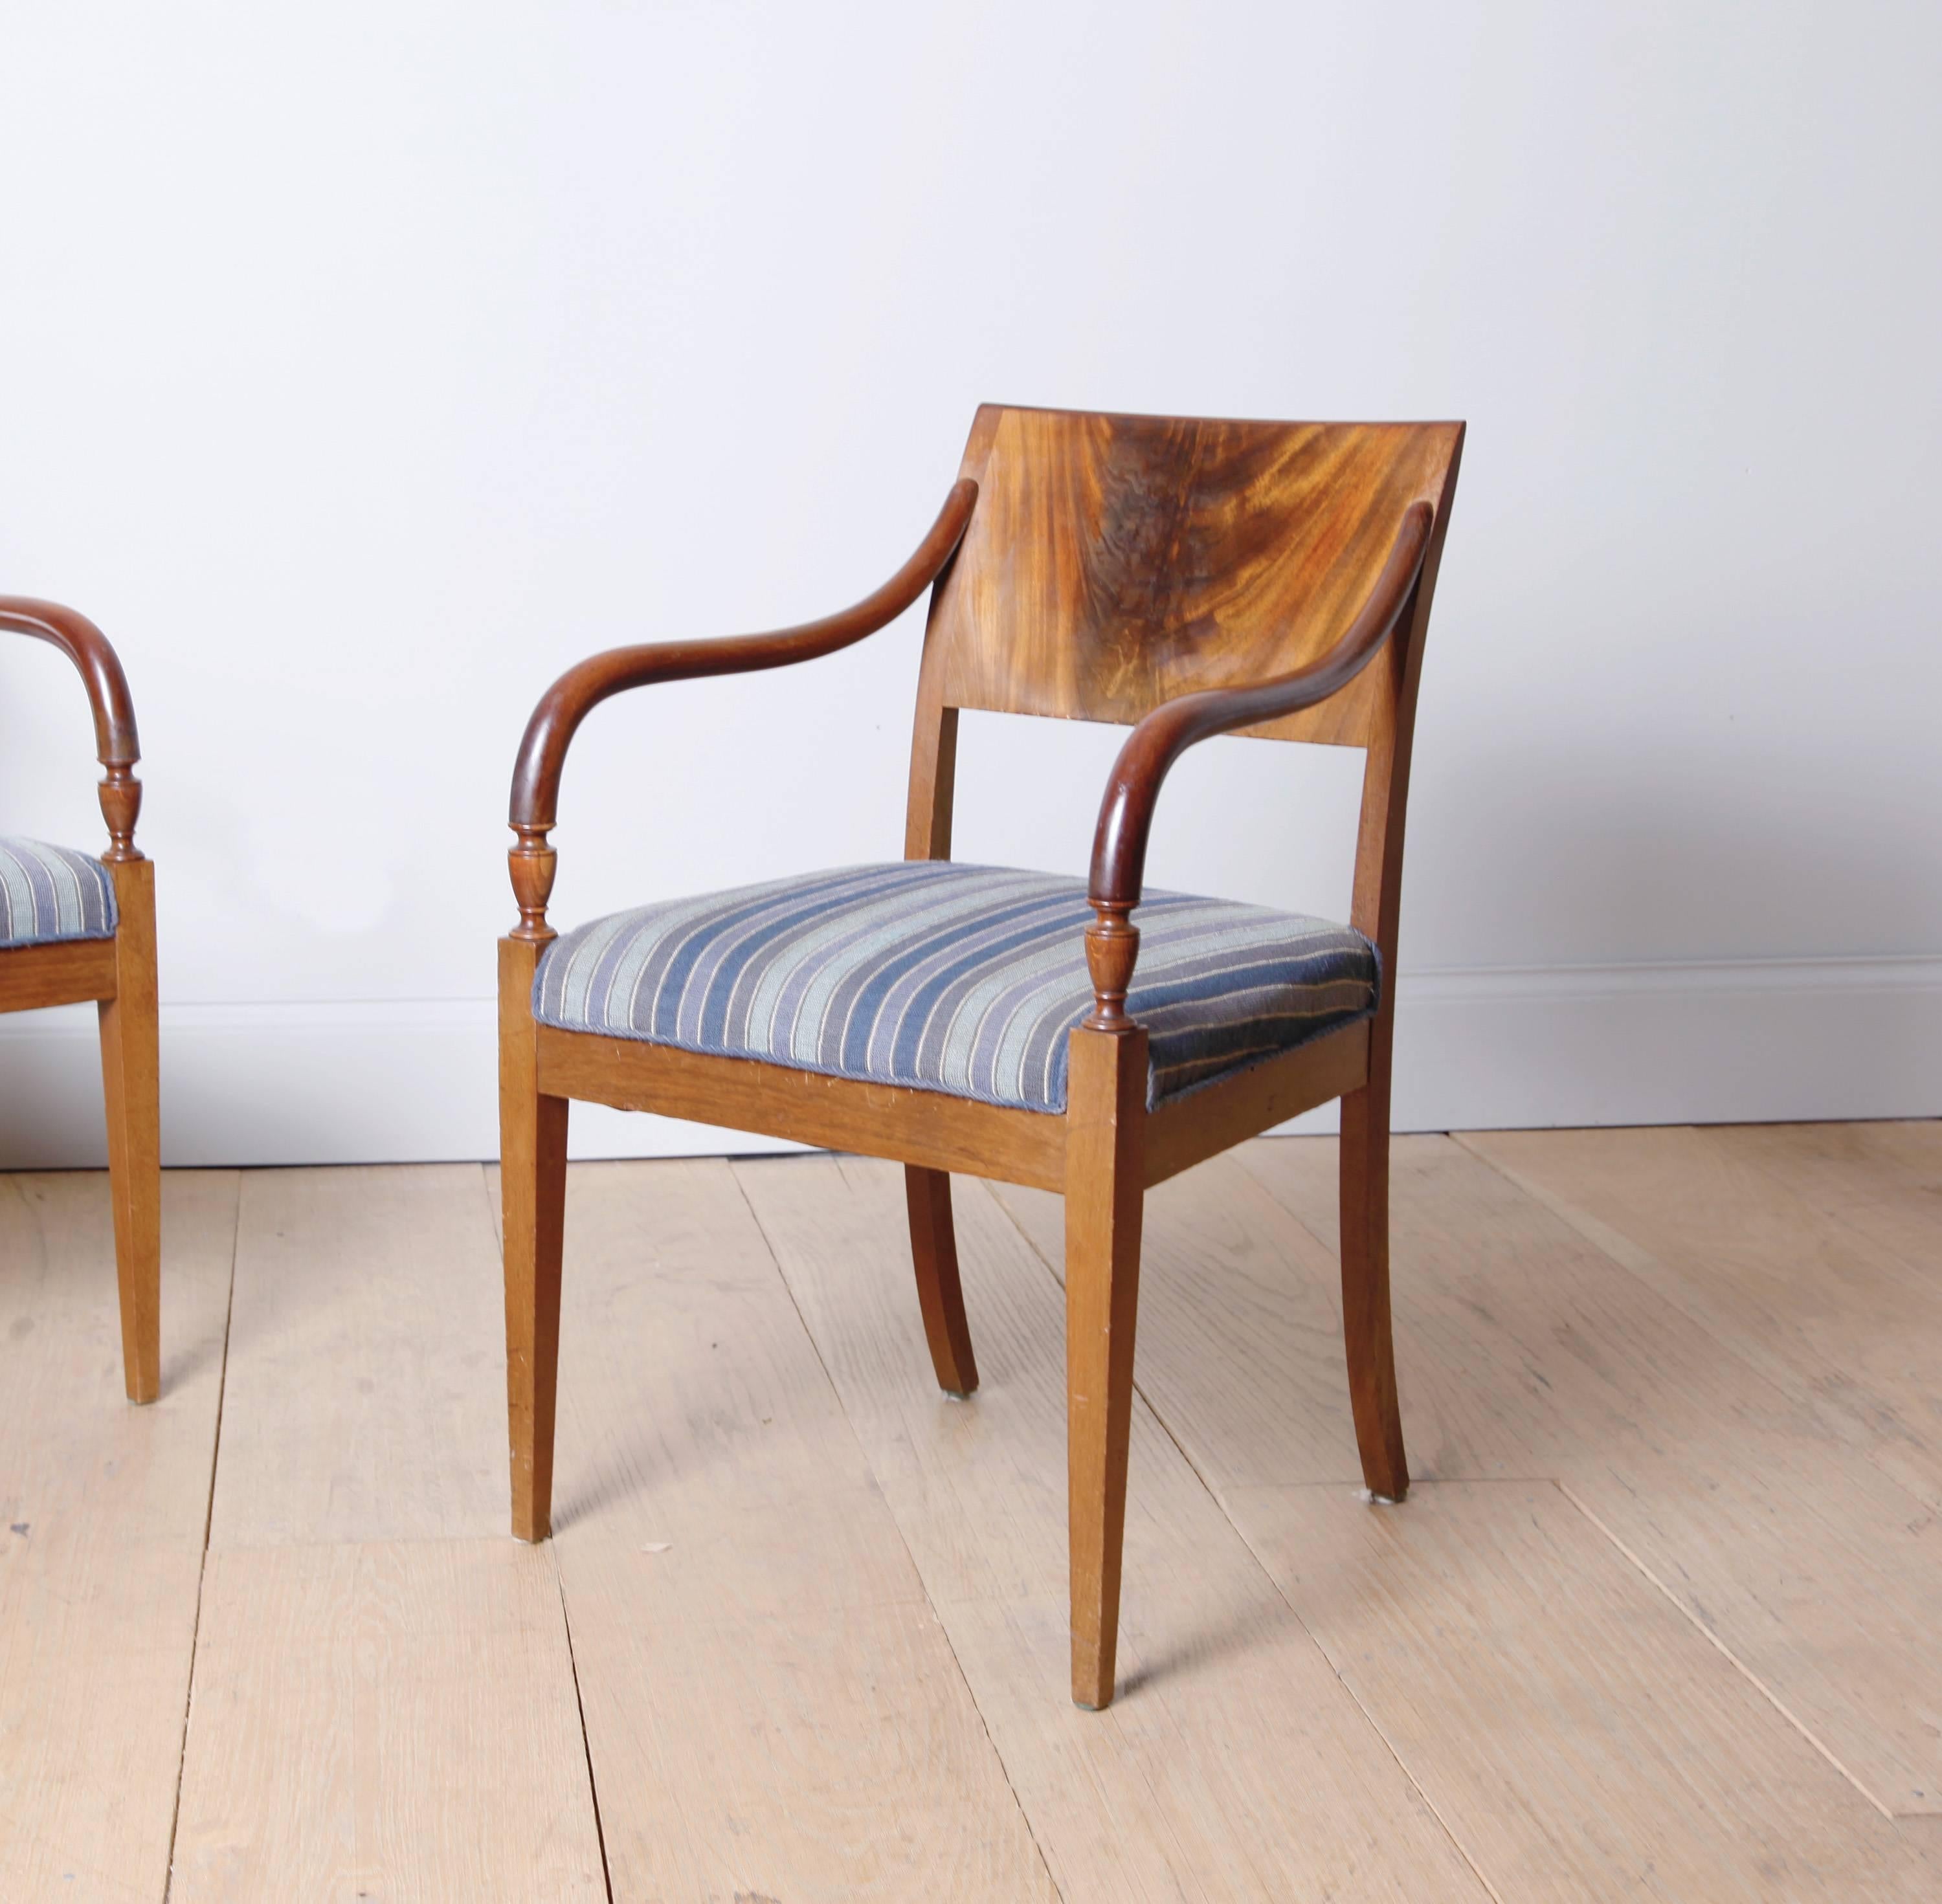 A pair of armchairs with a graceful profile. Fully restored, with original wool needlepoint upholstery.